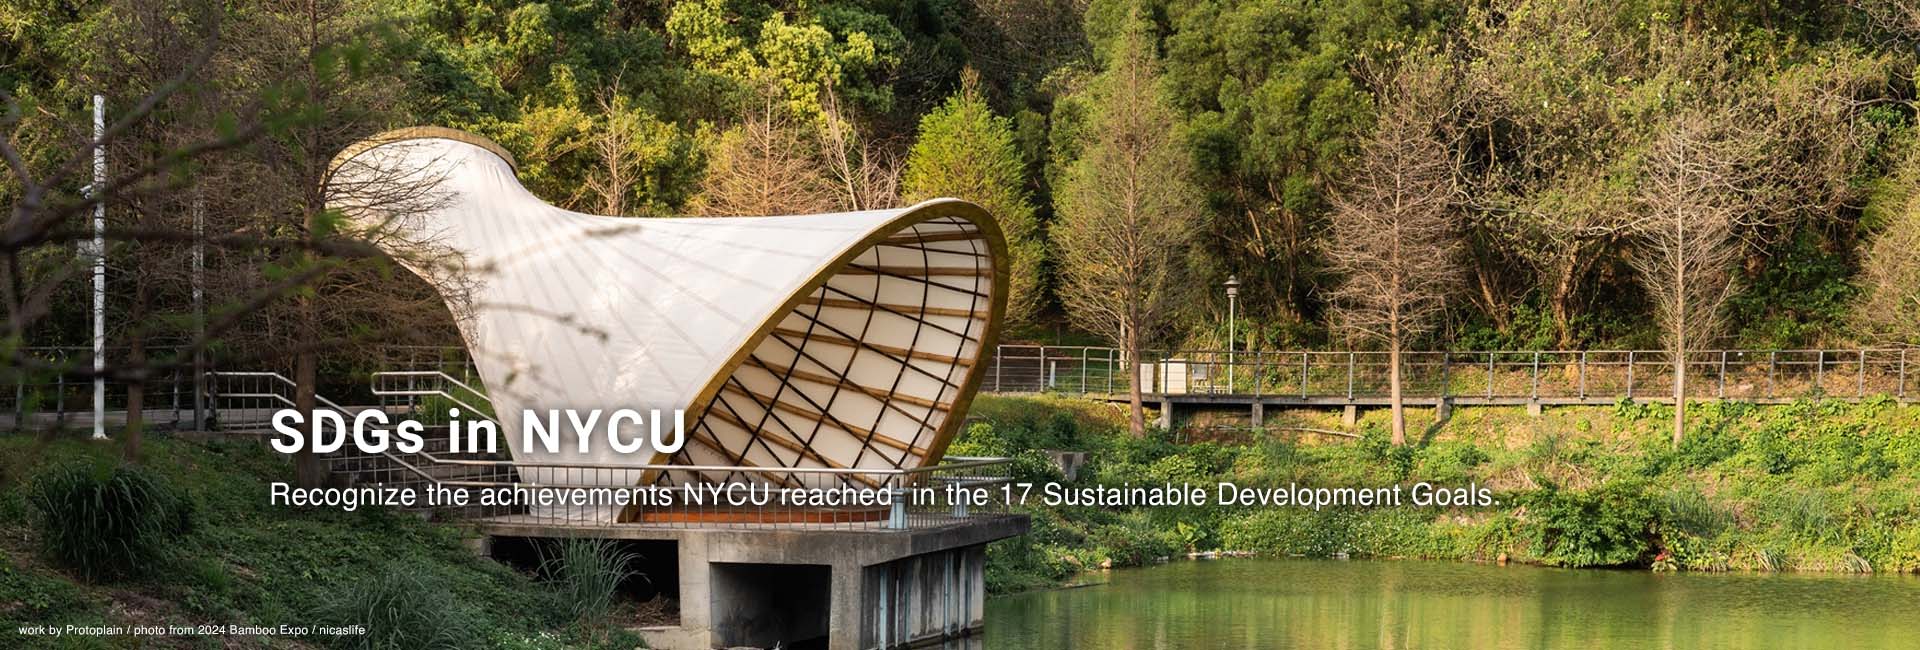 SDGs in NYCU